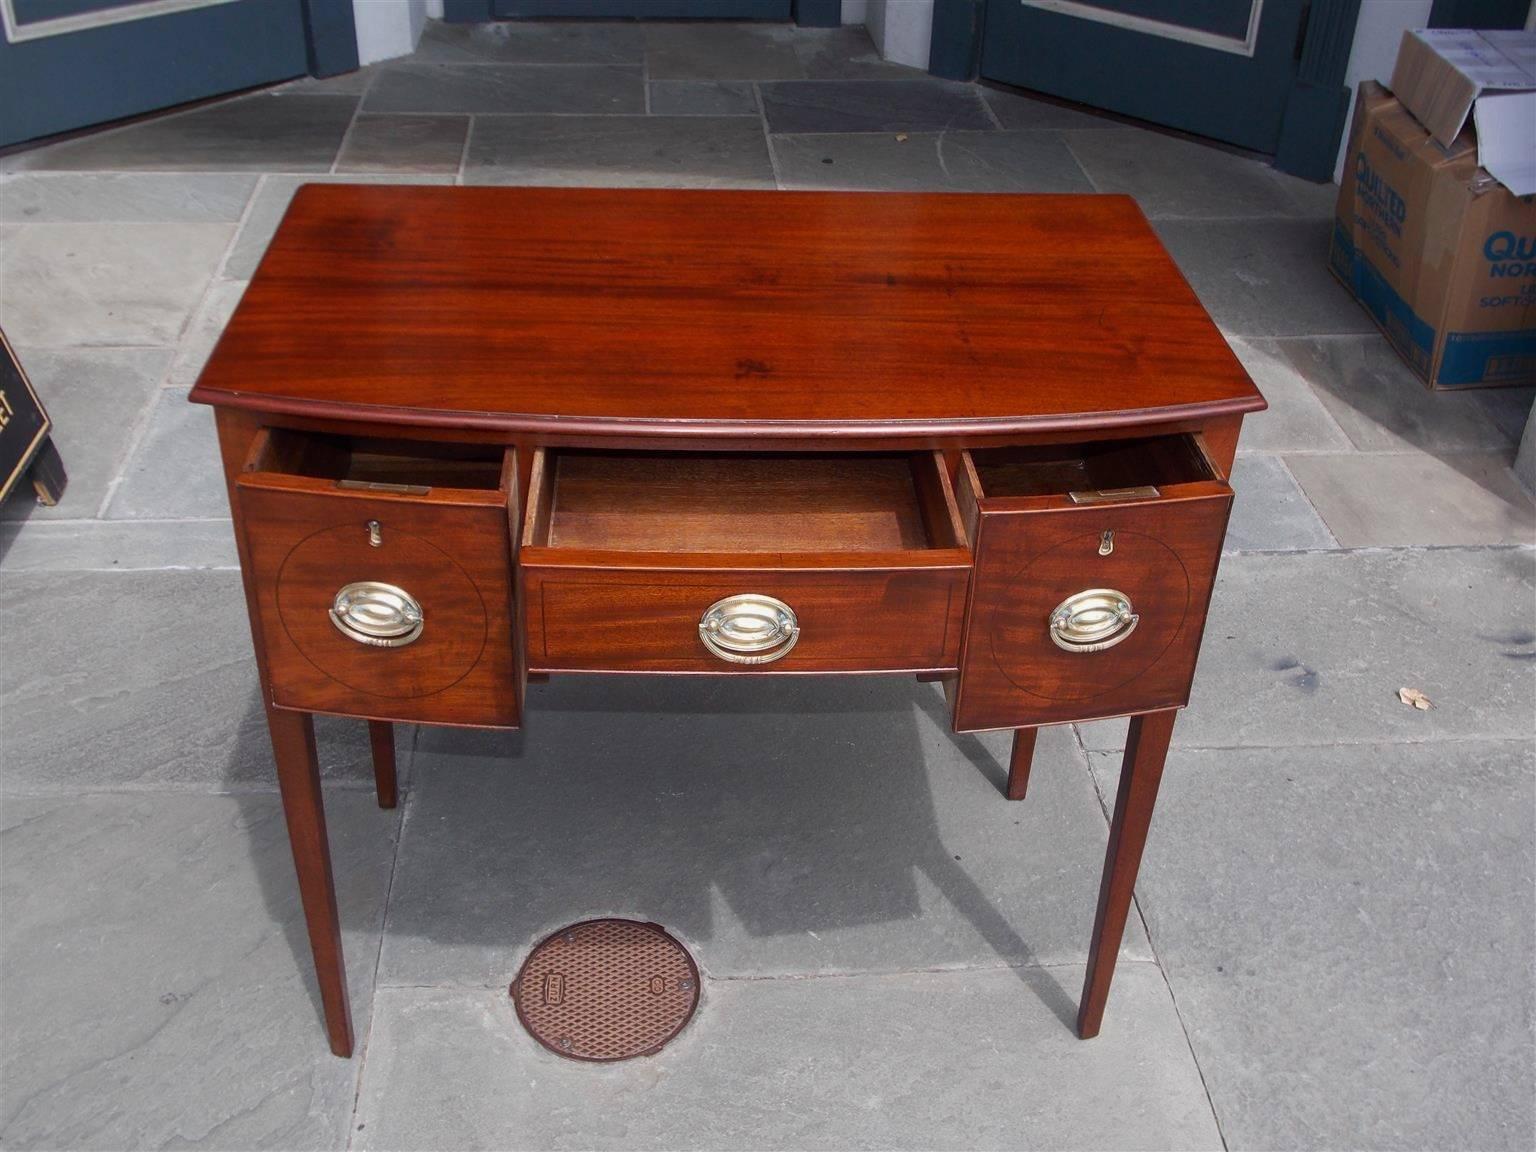 English mahogany bow front three-drawer lowboy / dressing table with arched centered knee hole, circular ebony string inlay, period brasses, and terminating on the original tapered squared legs, Early 19th Century.